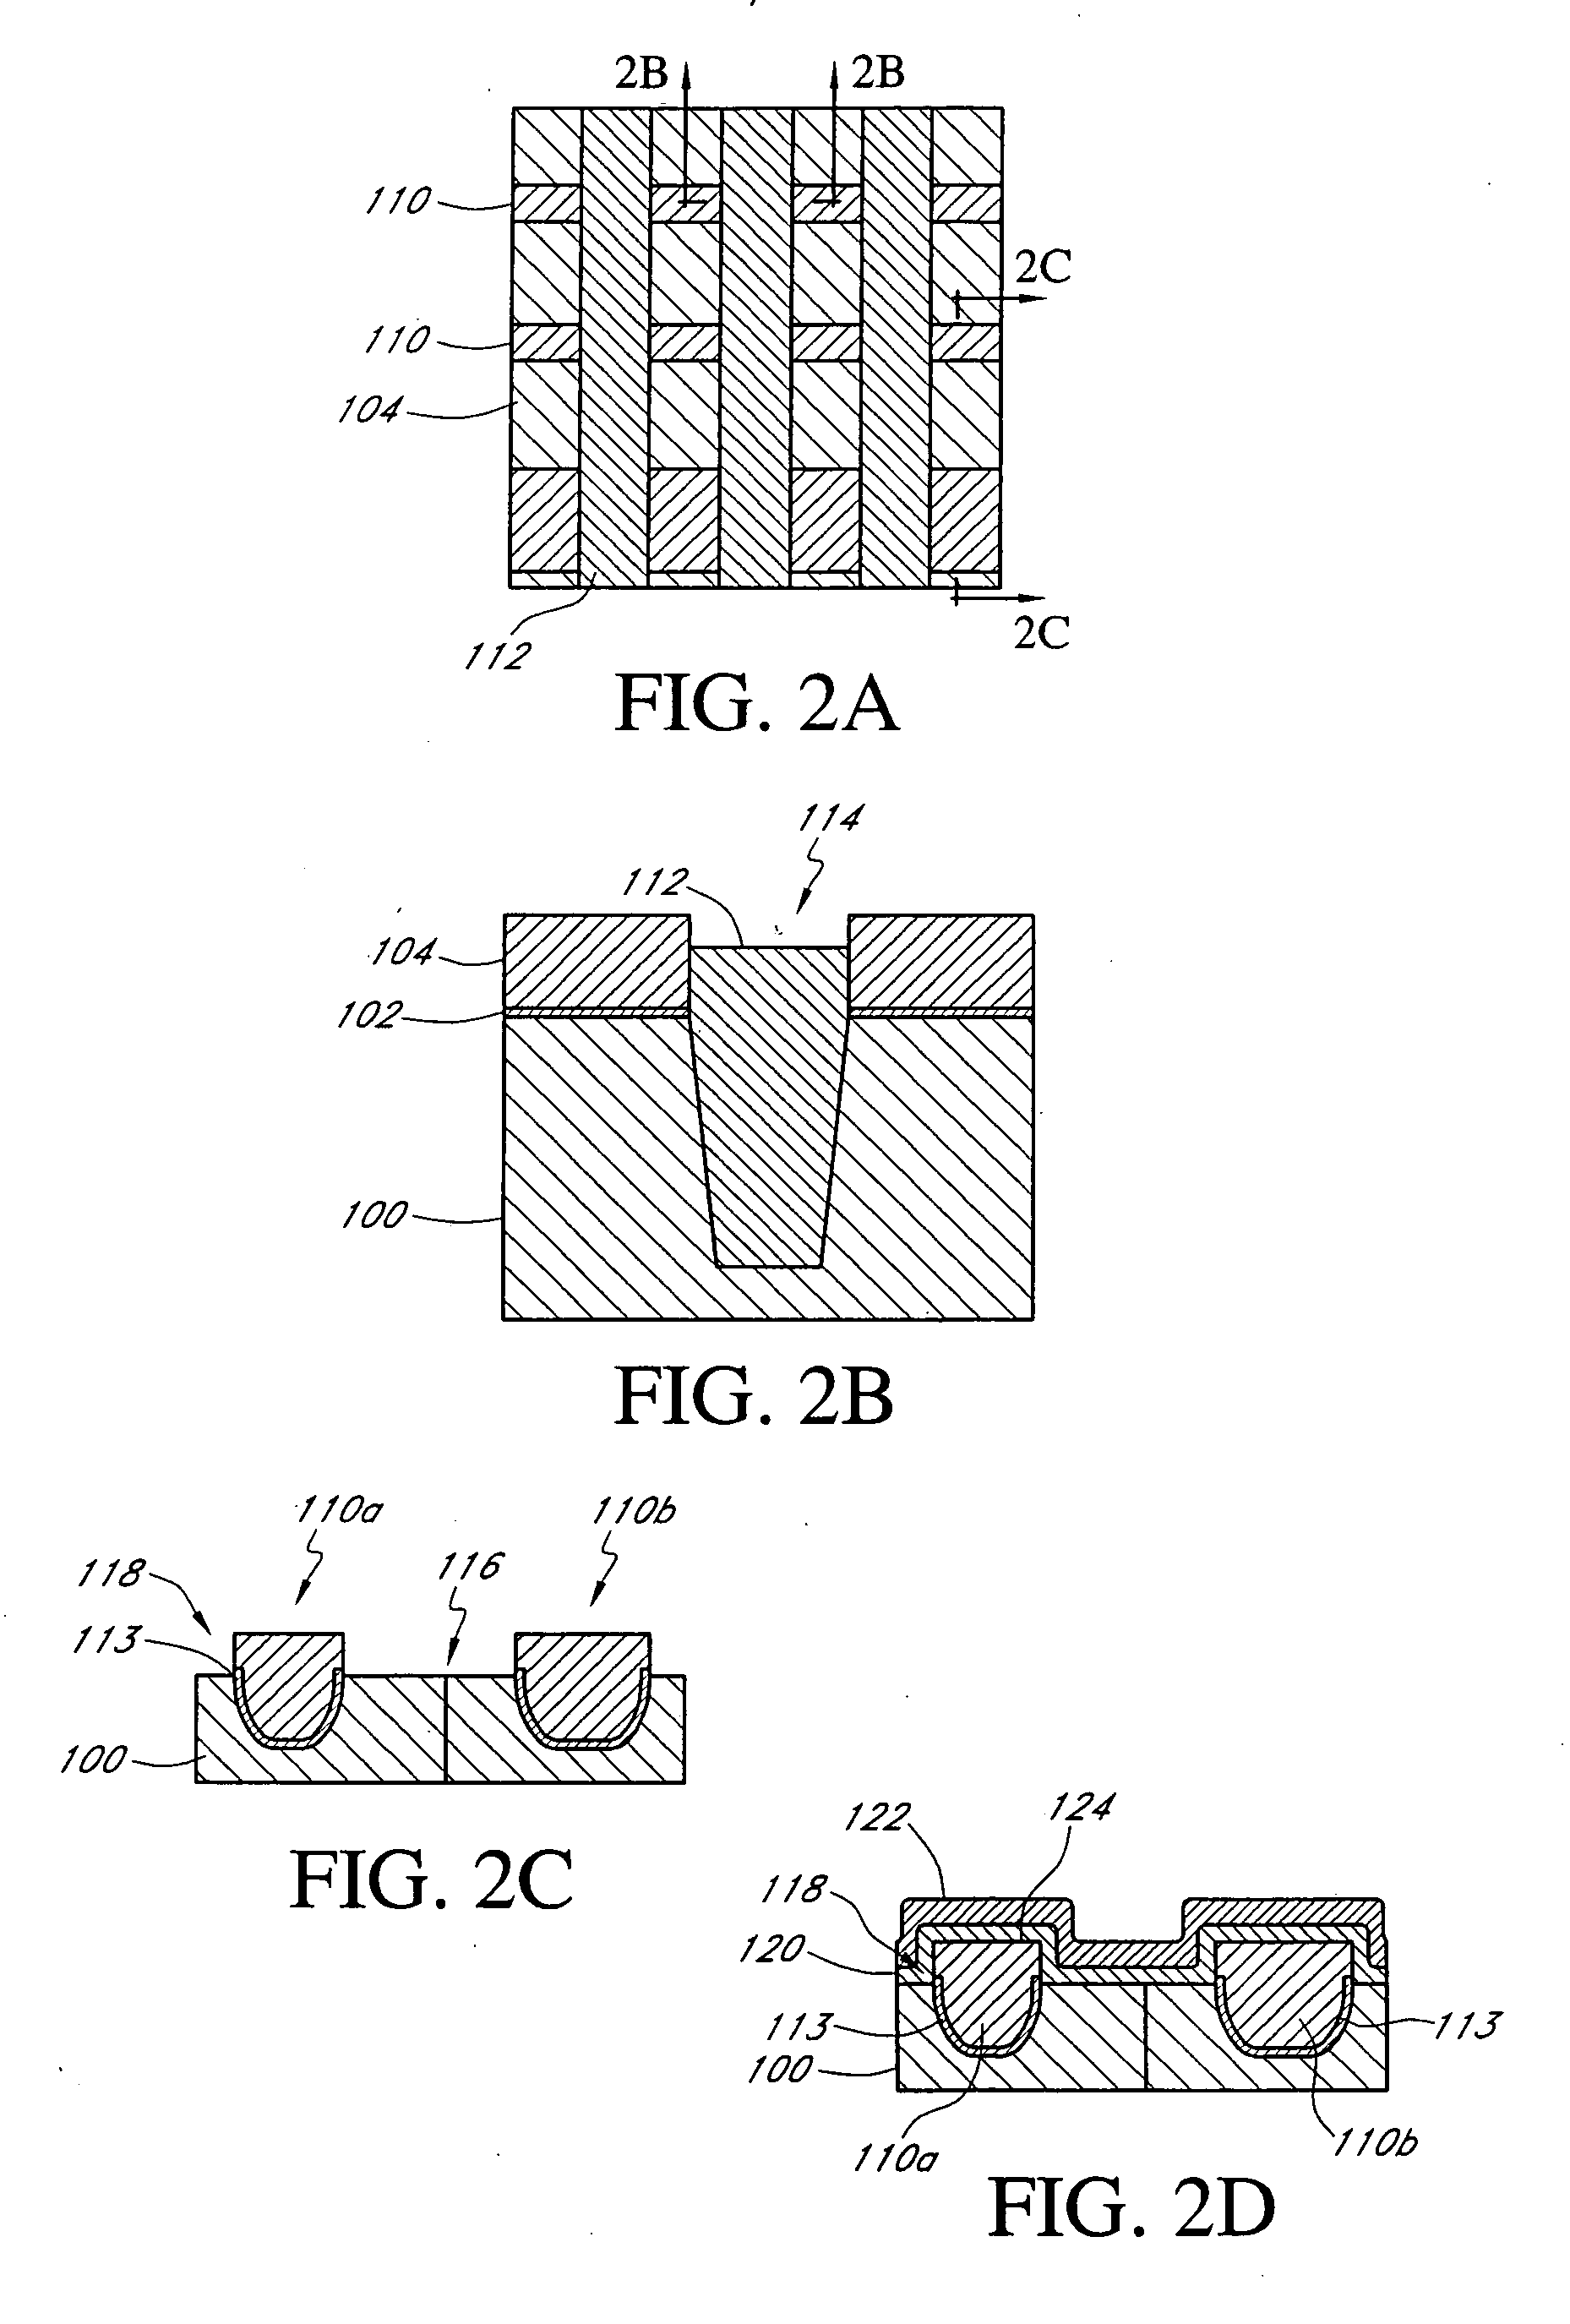 Flash memory with recessed floating gate